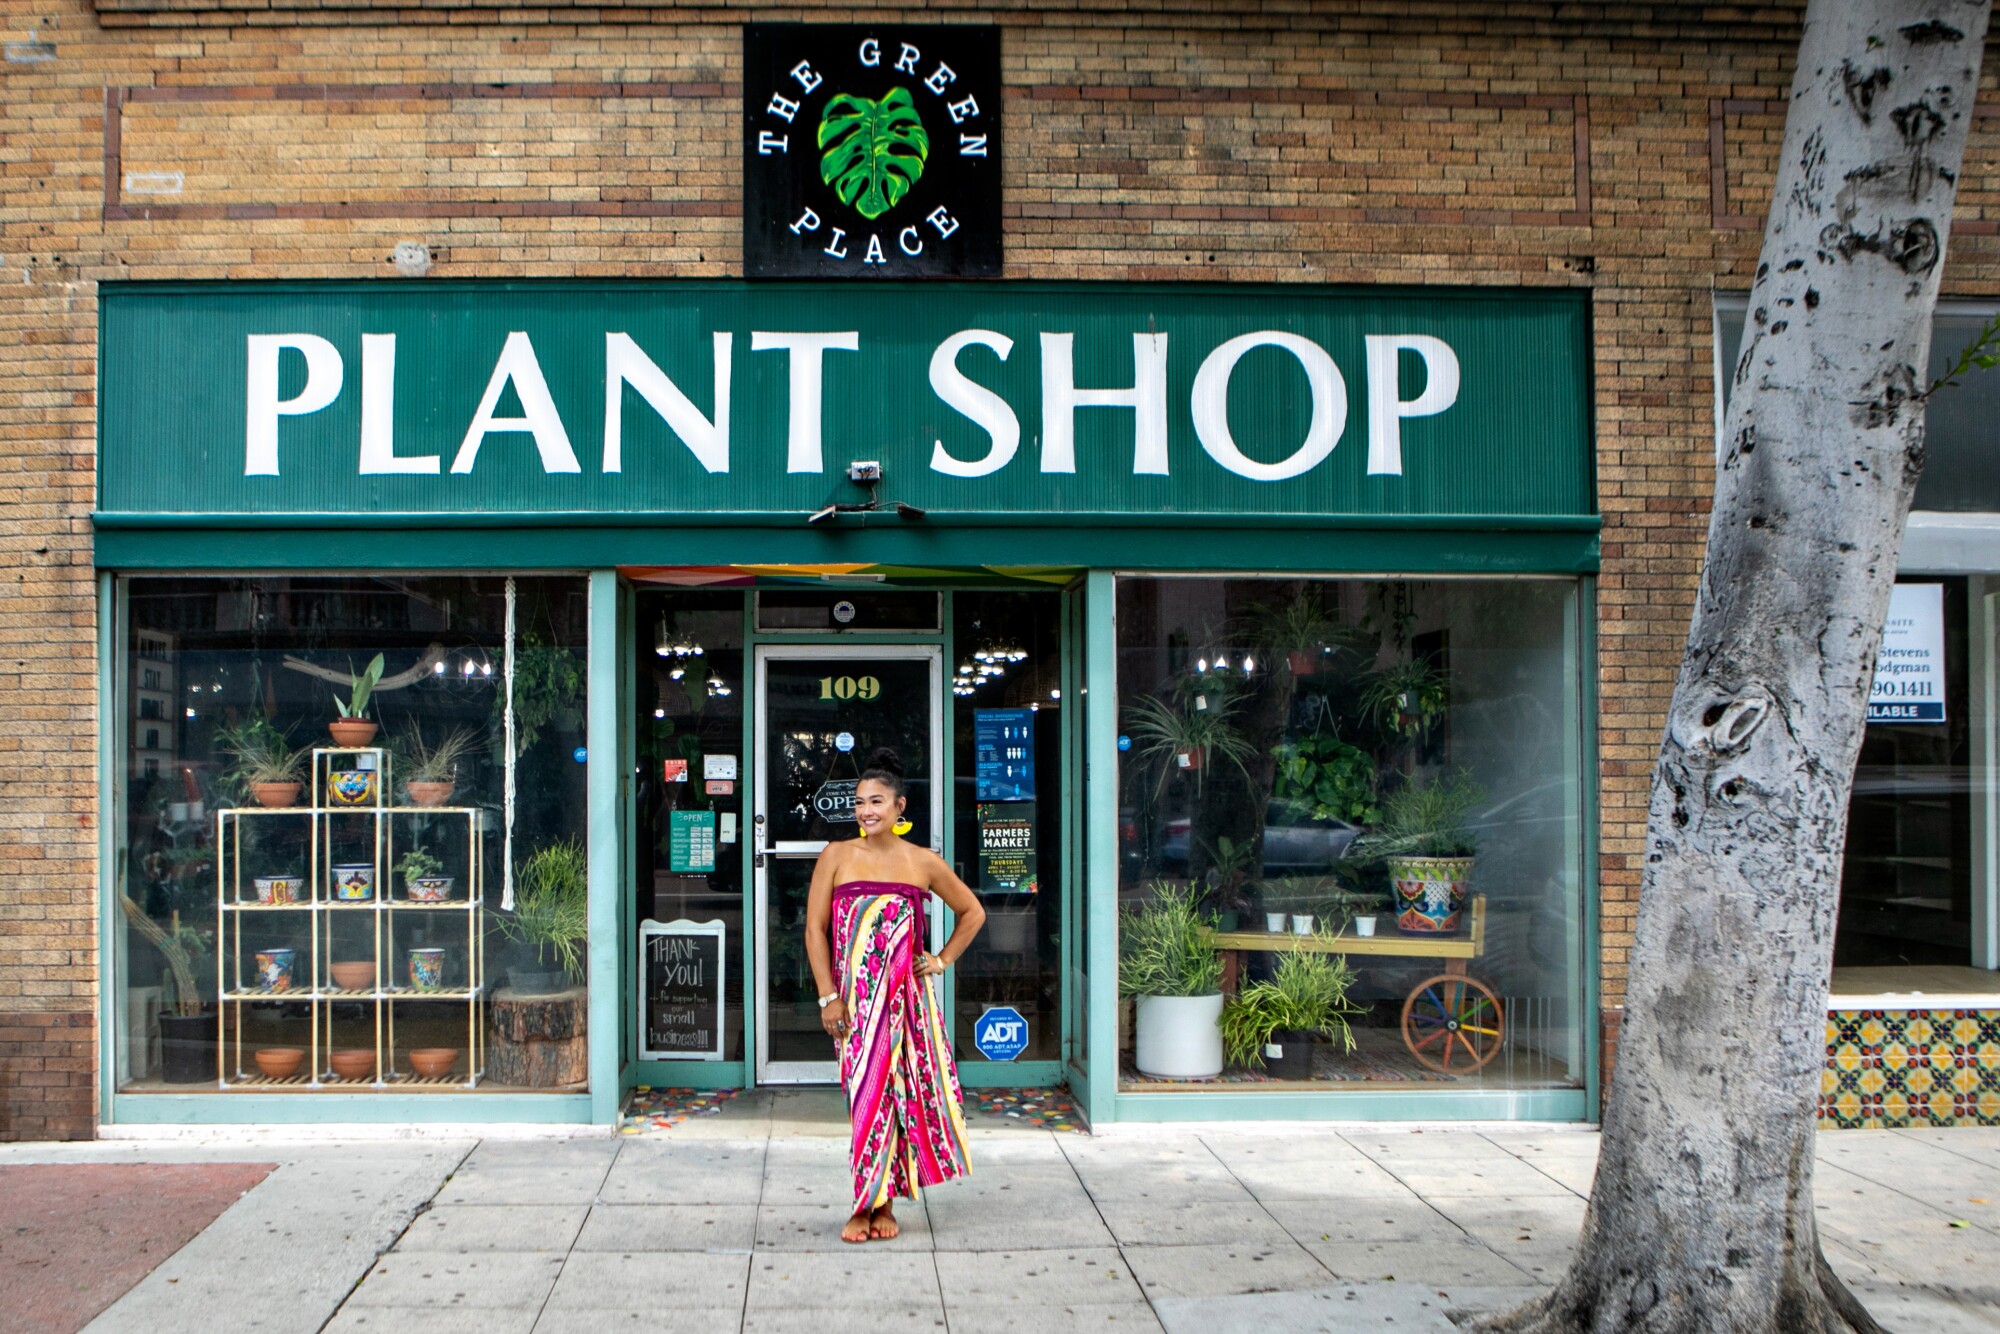 A woman stands on the sidewalk outside a store with a sign reading "The Green Place Plant Shop."